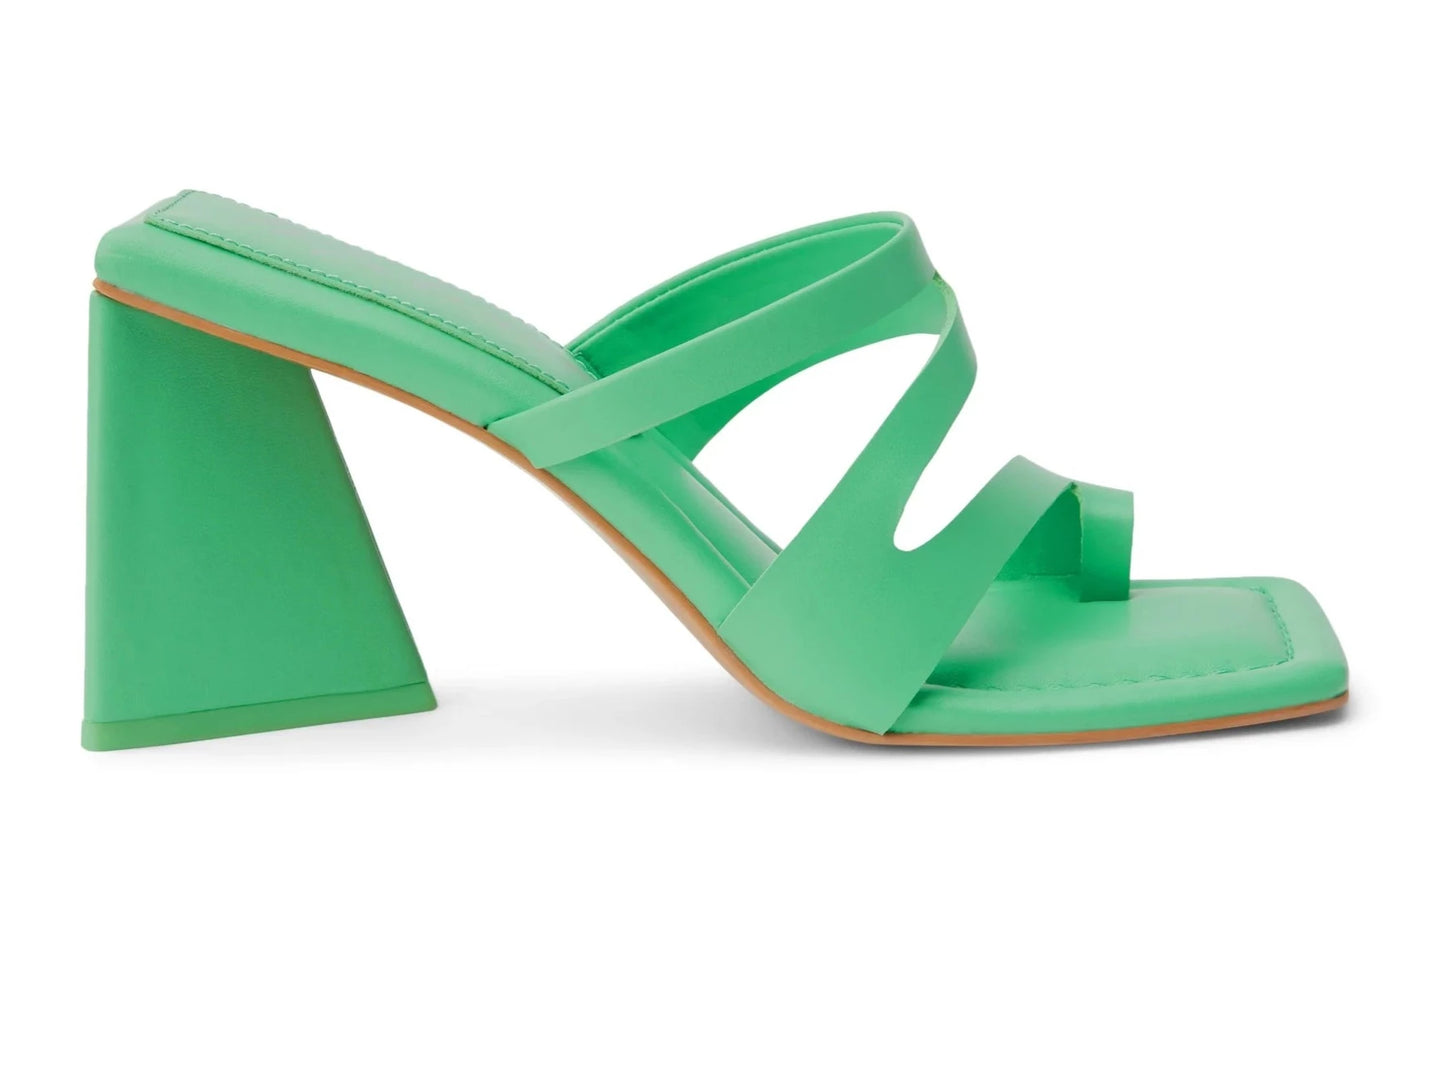 Oslo Heeled Sandal - Green Vegan, heeled sandal with asymmetrical upper and triangular heel Synthetic leather upper